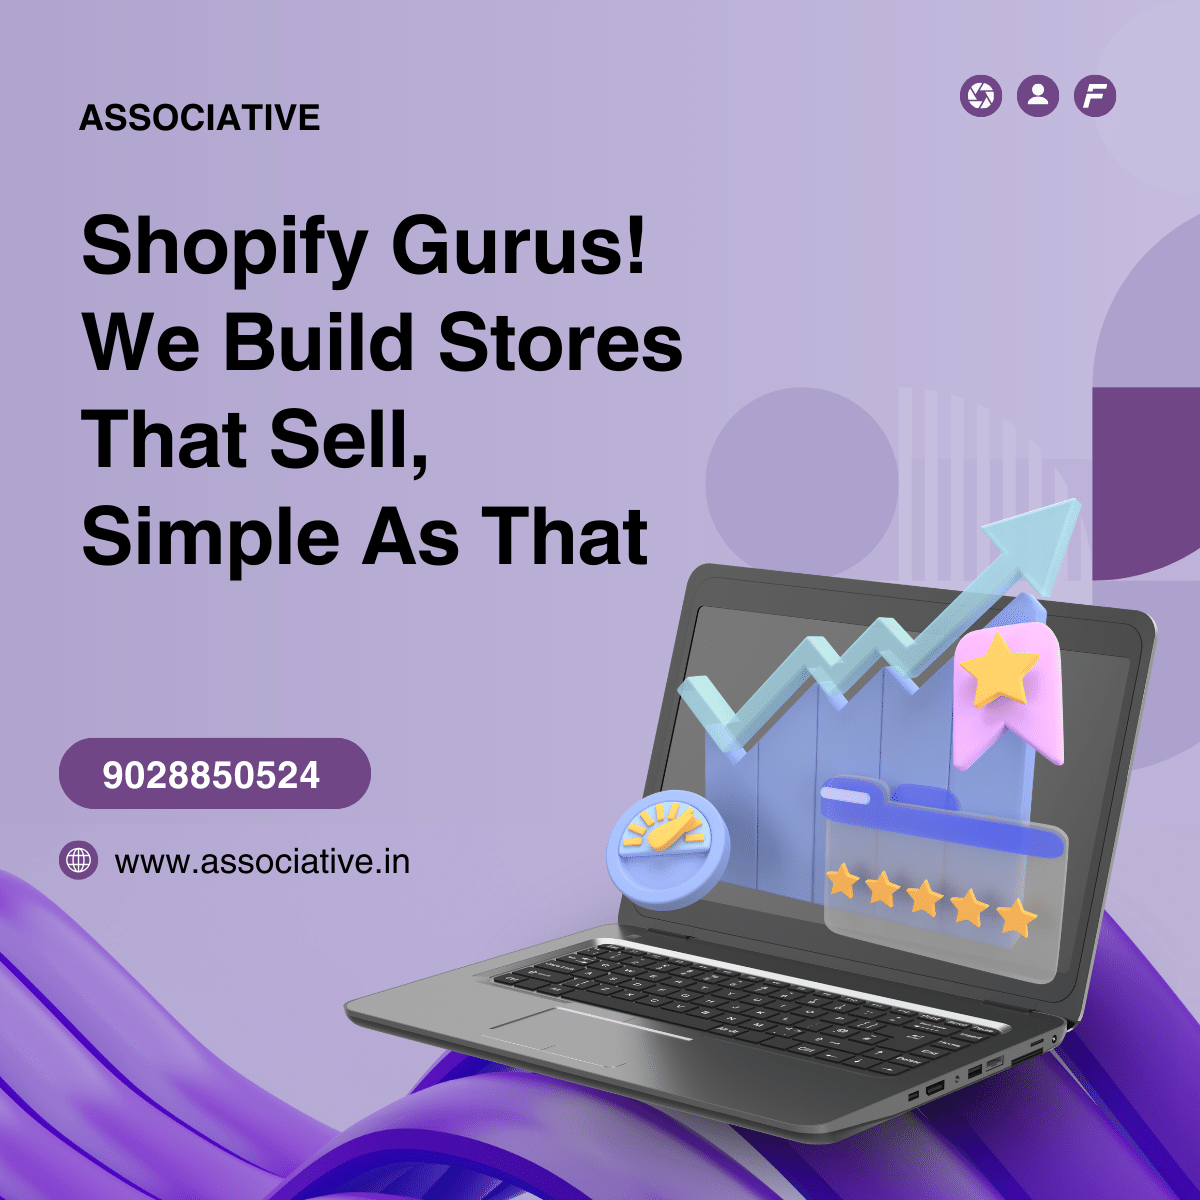 Shopify Gurus! We Build Stores That Sell, Simple As That